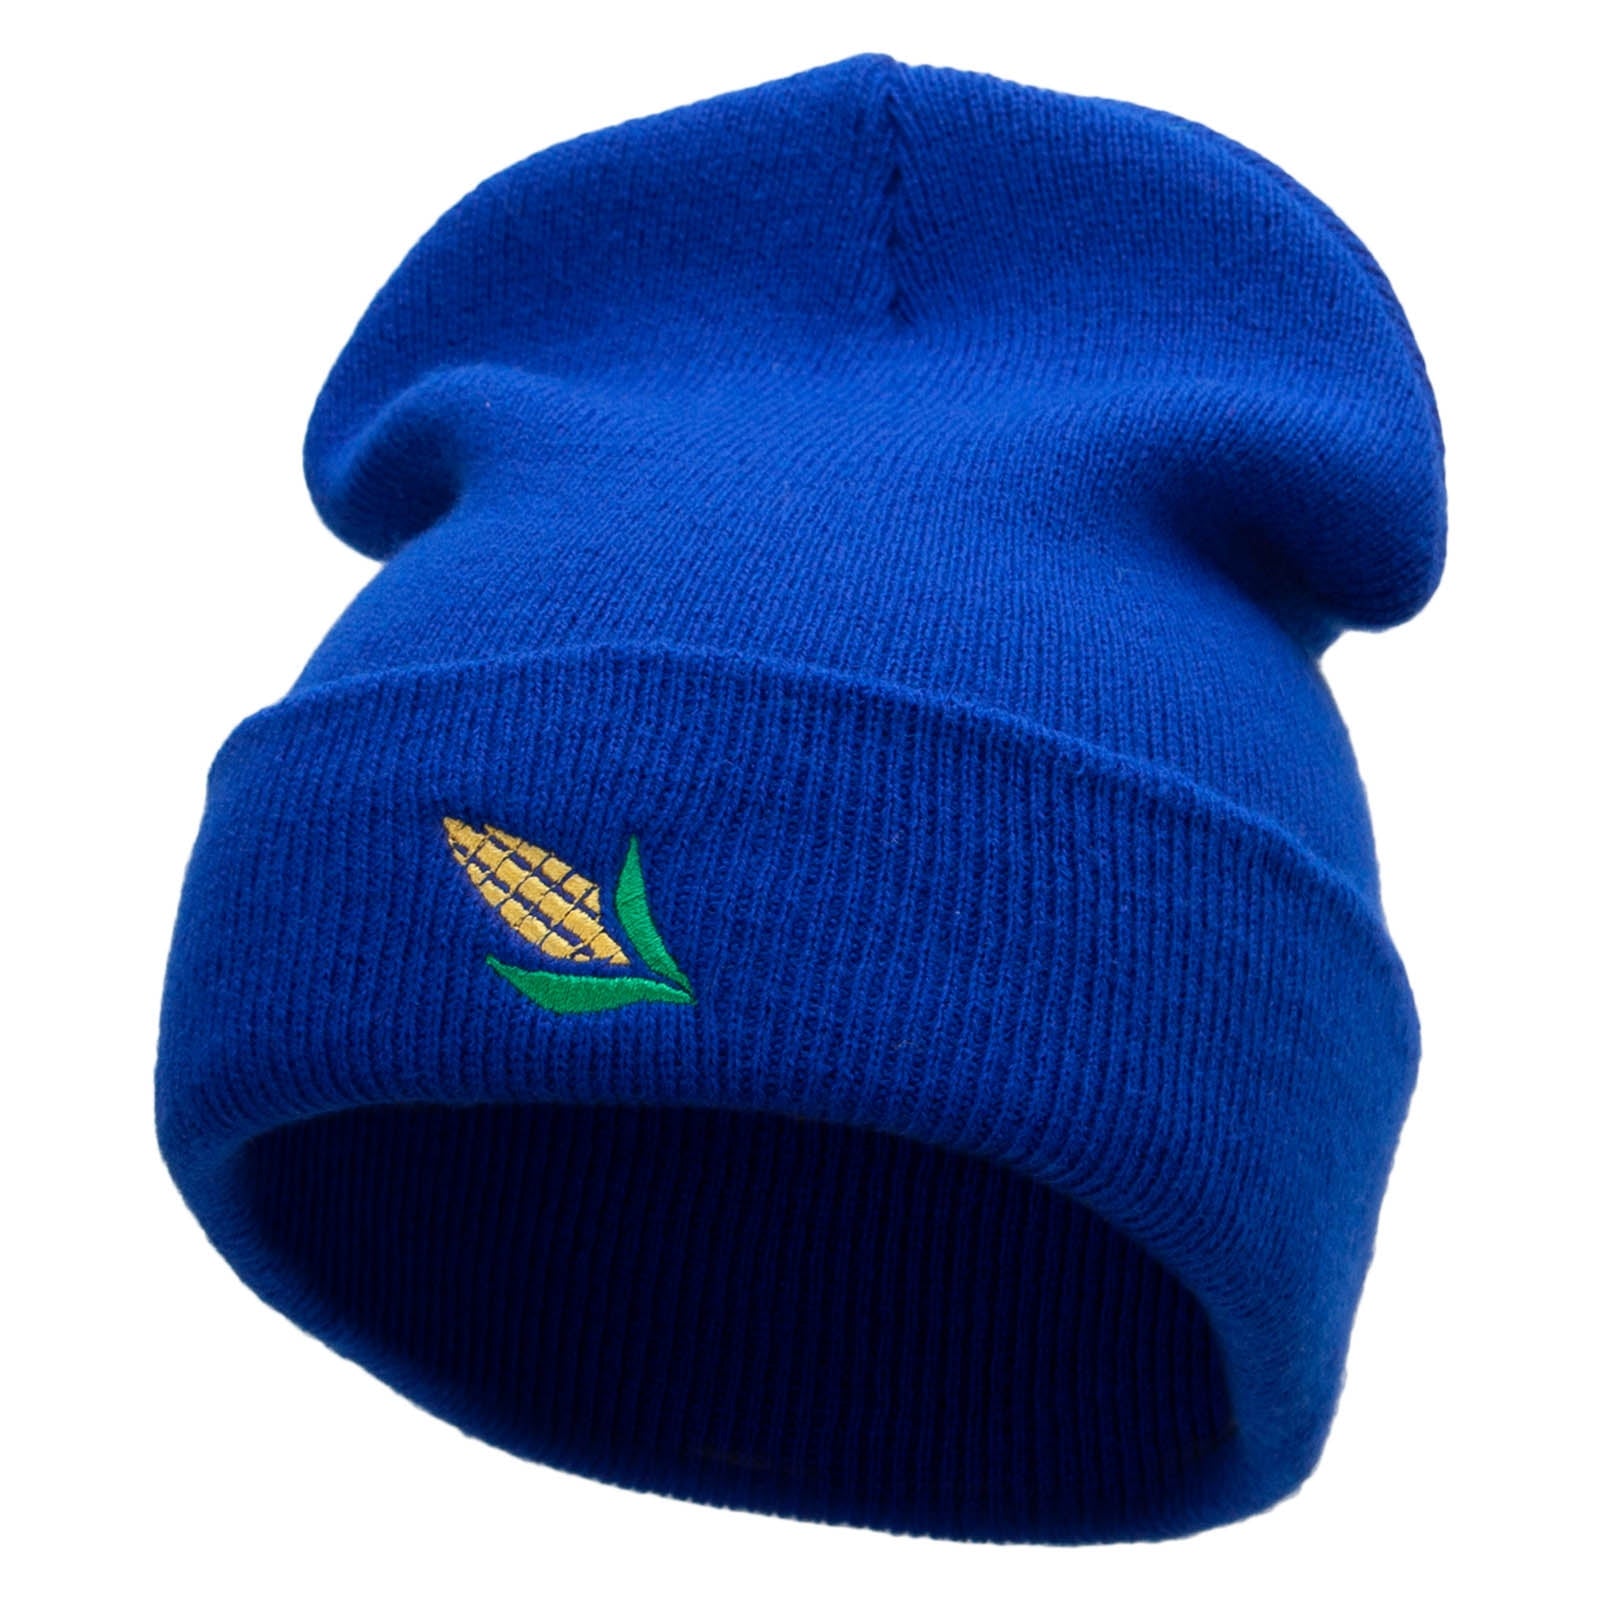 Corn Cob Embroidered 12 Inch Solid Long Beanie Made in USA - Royal OSFM